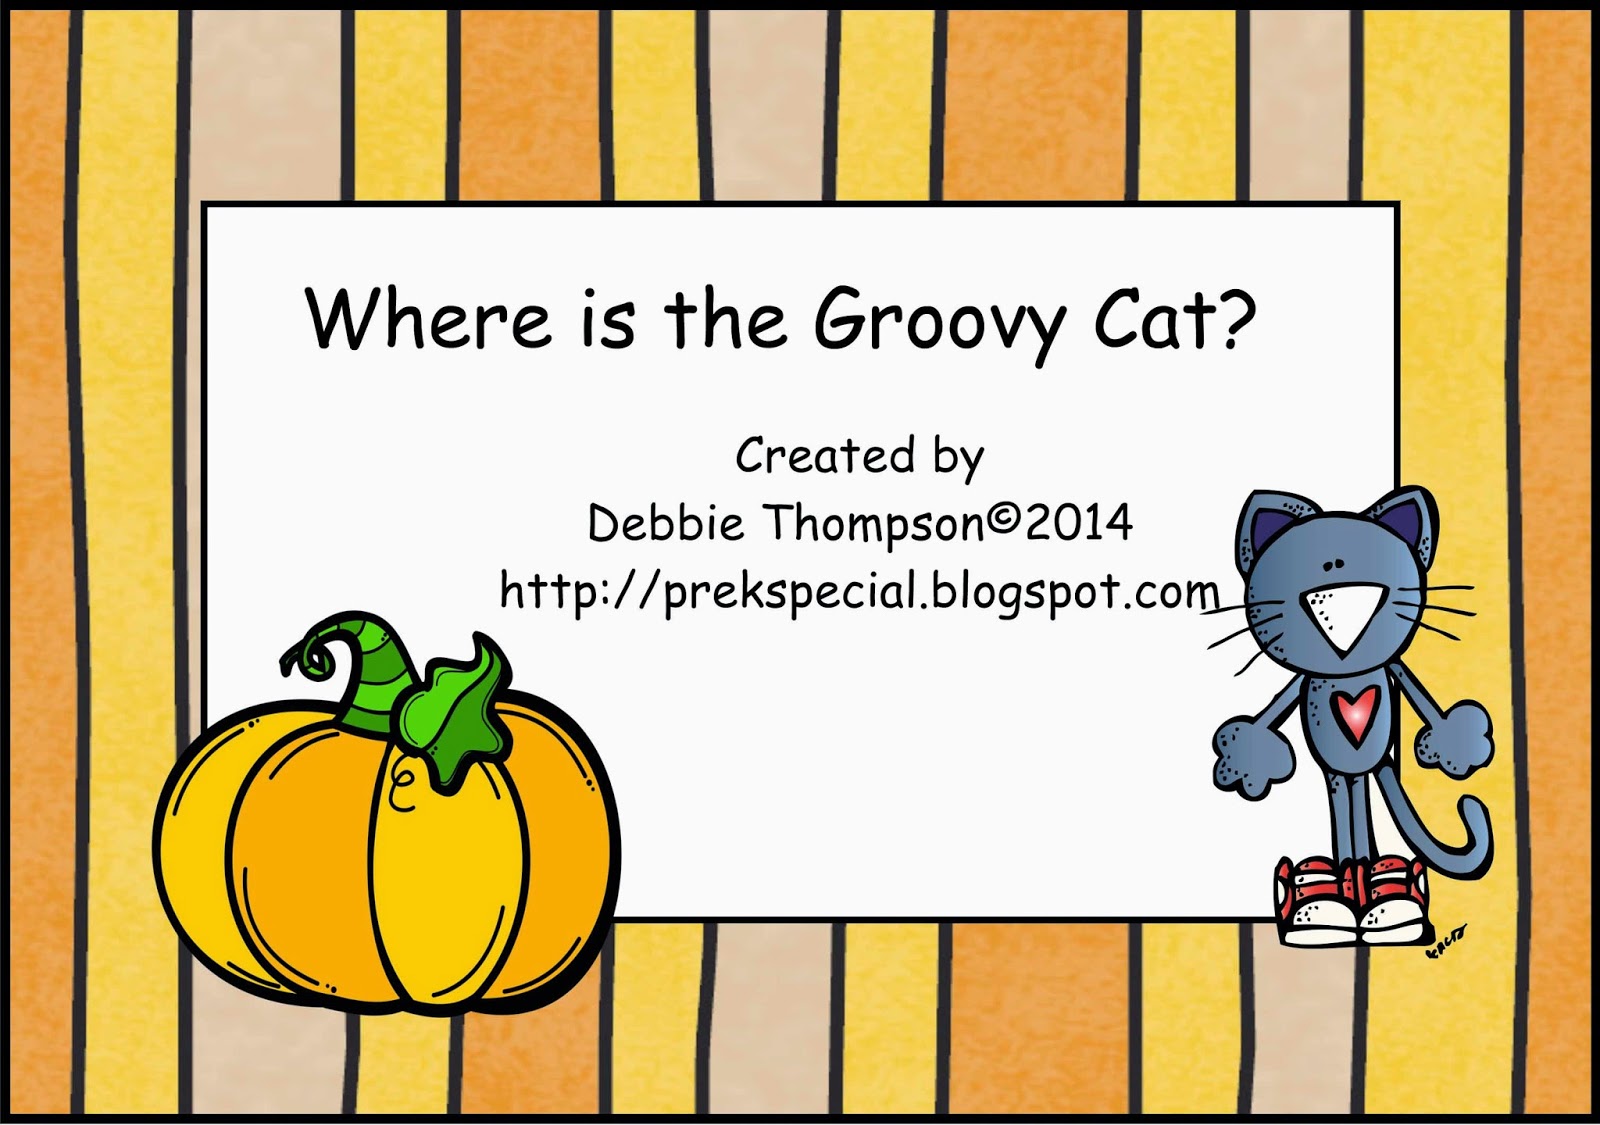 http://www.teachersnotebook.com/product/dt0621/where-is-the-groovy-cat